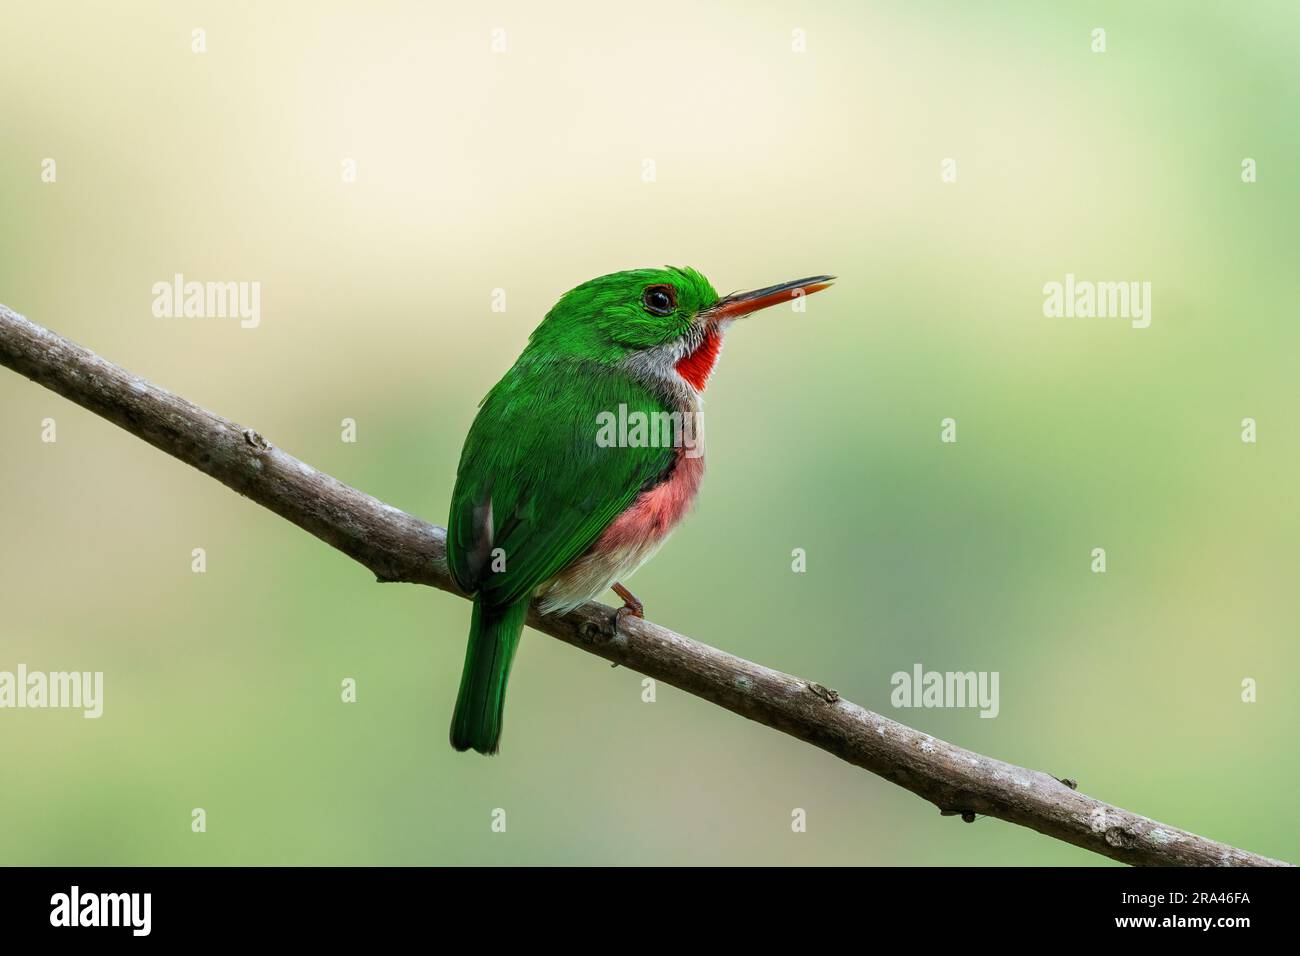 Close-up of a green and red tody bird on a branch - looking to the right. The background is isolated and blurred. Stock Photo